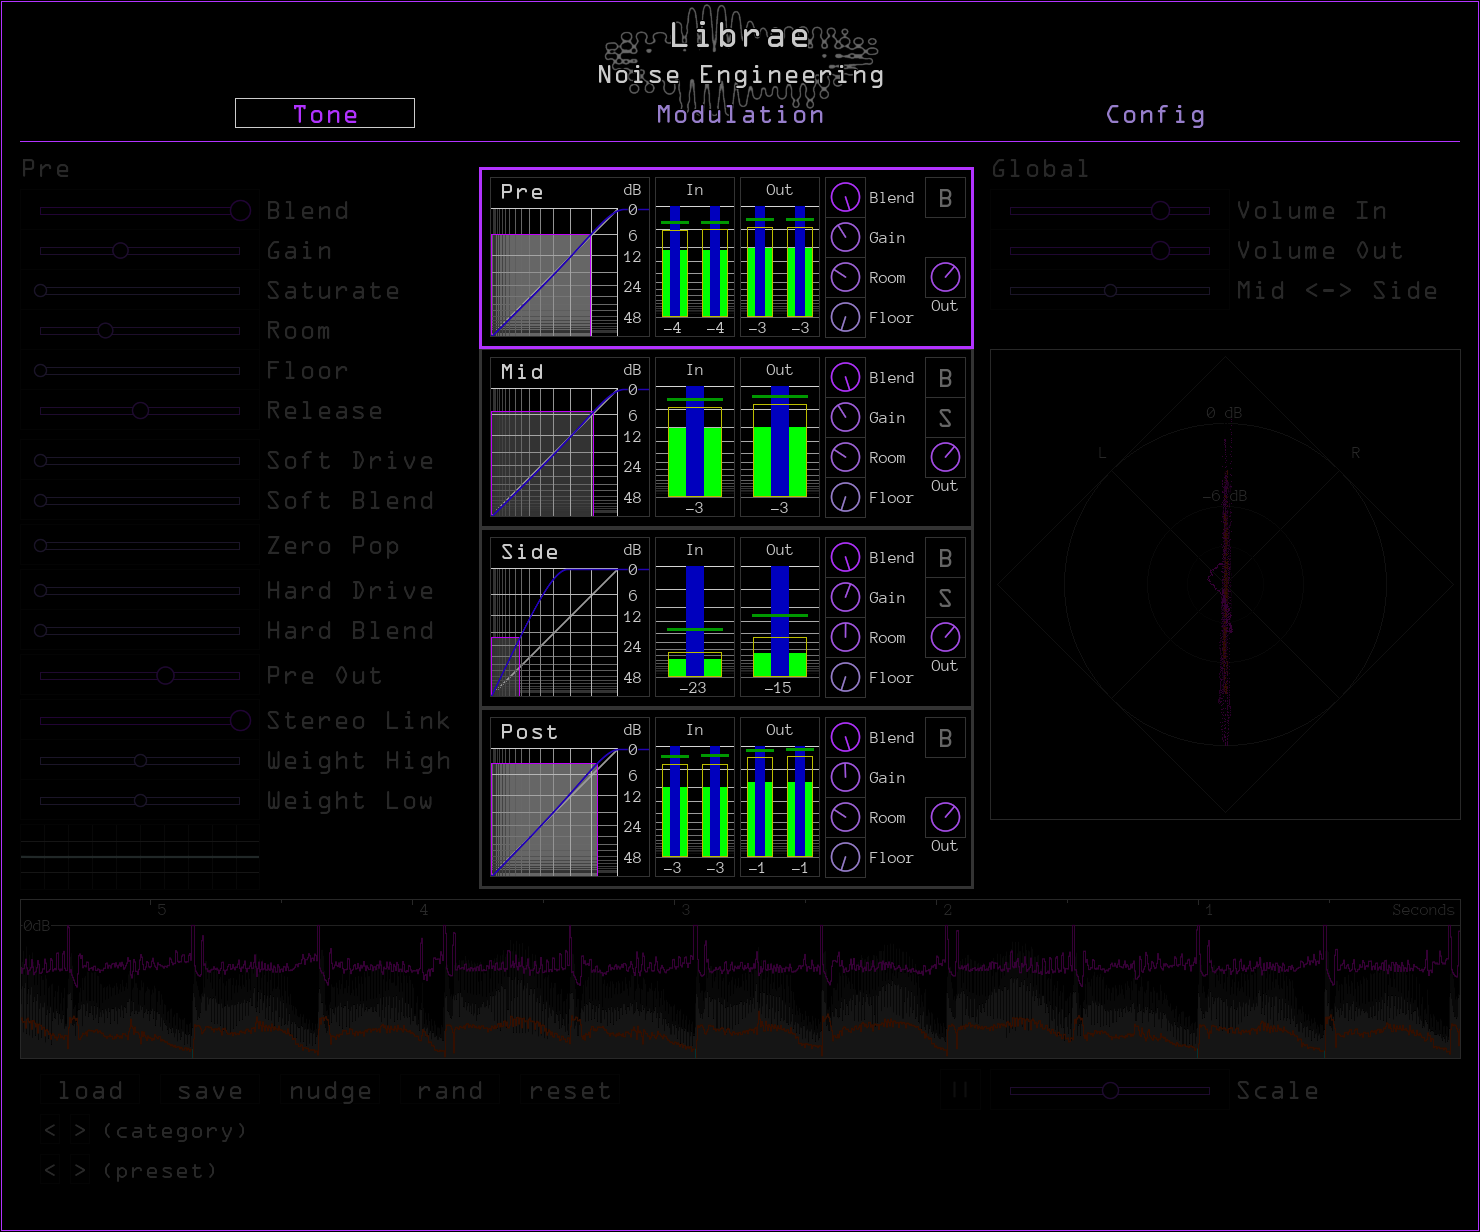 Librae's global controls and meters highlighted